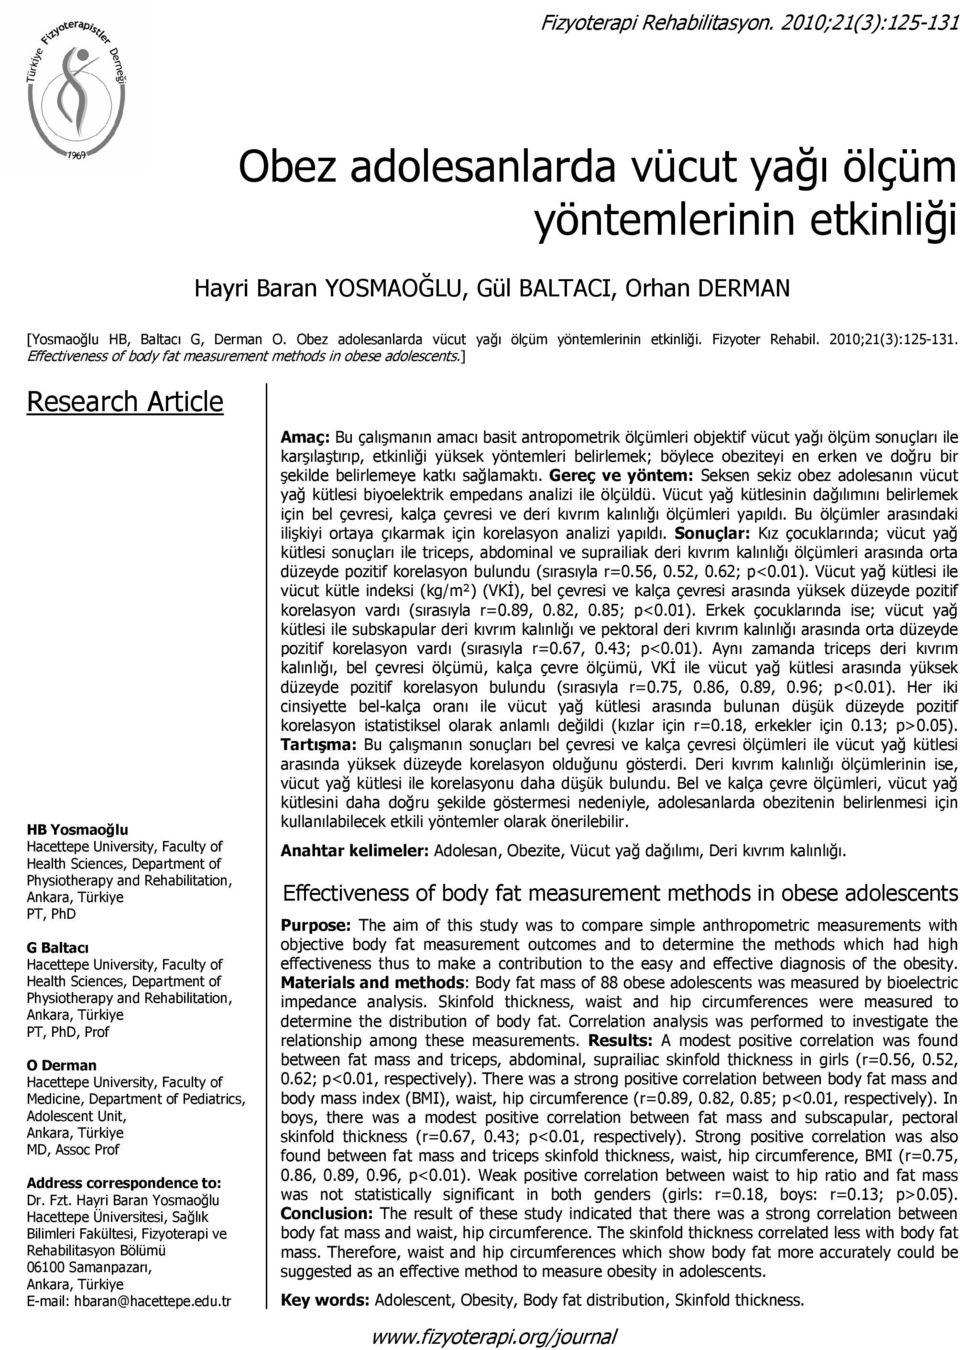 ] Research Article HB Yosmaoğlu Hacettepe University, Faculty of Health Sciences, Department of Physiotherapy and Rehabilitation, PT, PhD G Baltacı Hacettepe University, Faculty of Health Sciences,